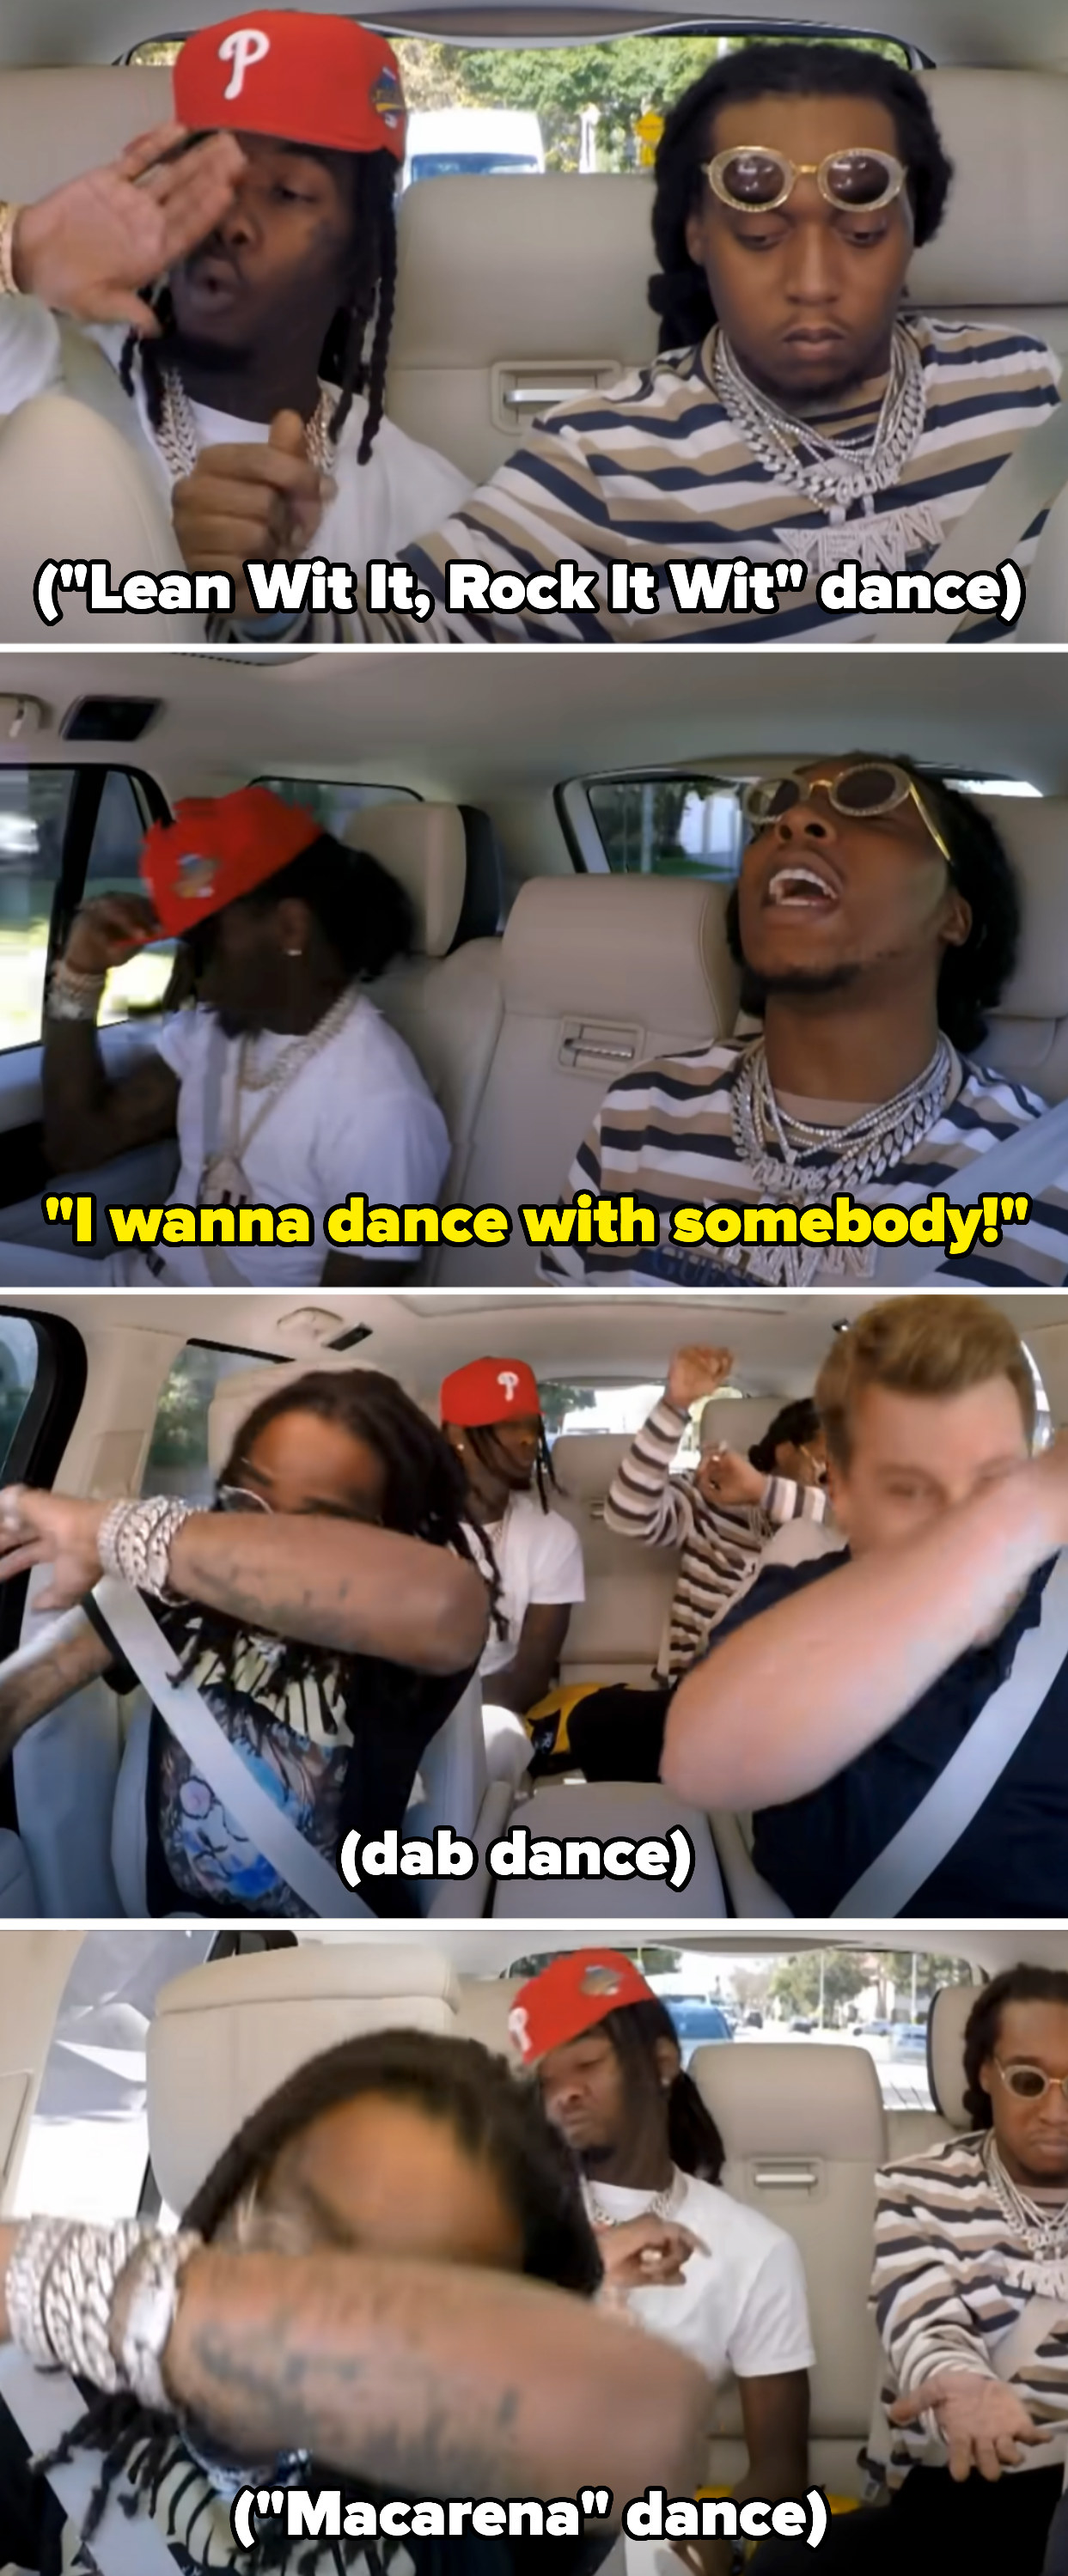 Takeoff doing several different dances in the car while singing along to Whitney Houston